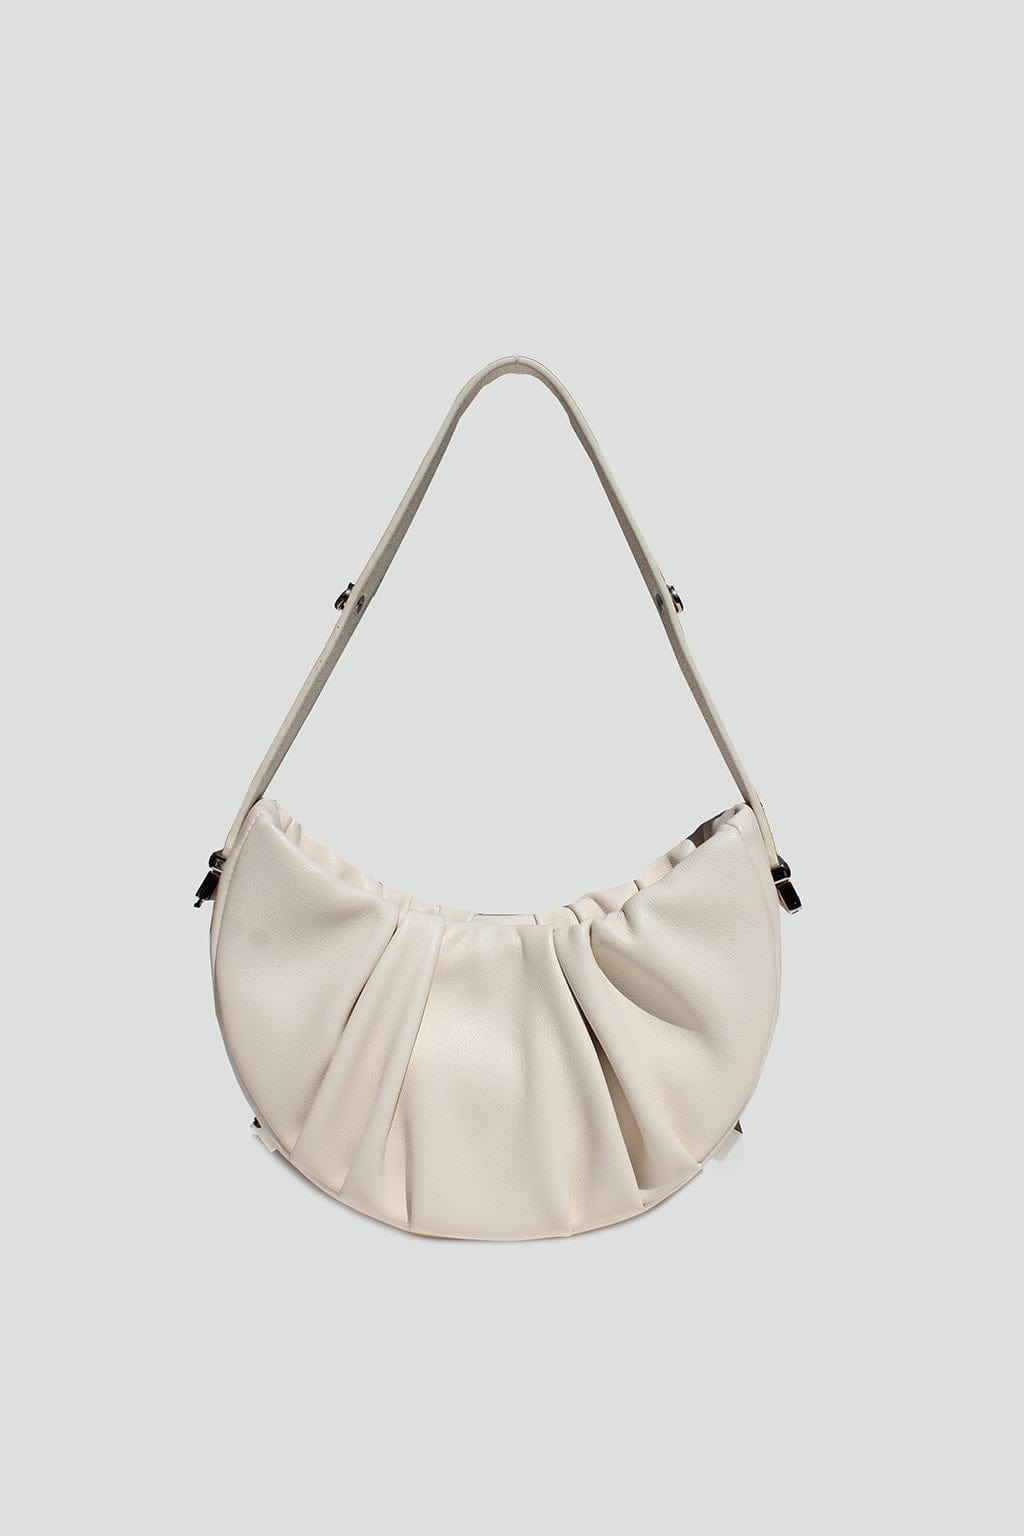 Isla Gathered Round Bag Ivory, Bag by Street Level / Triple 7 Global Inc | LIT Boutique